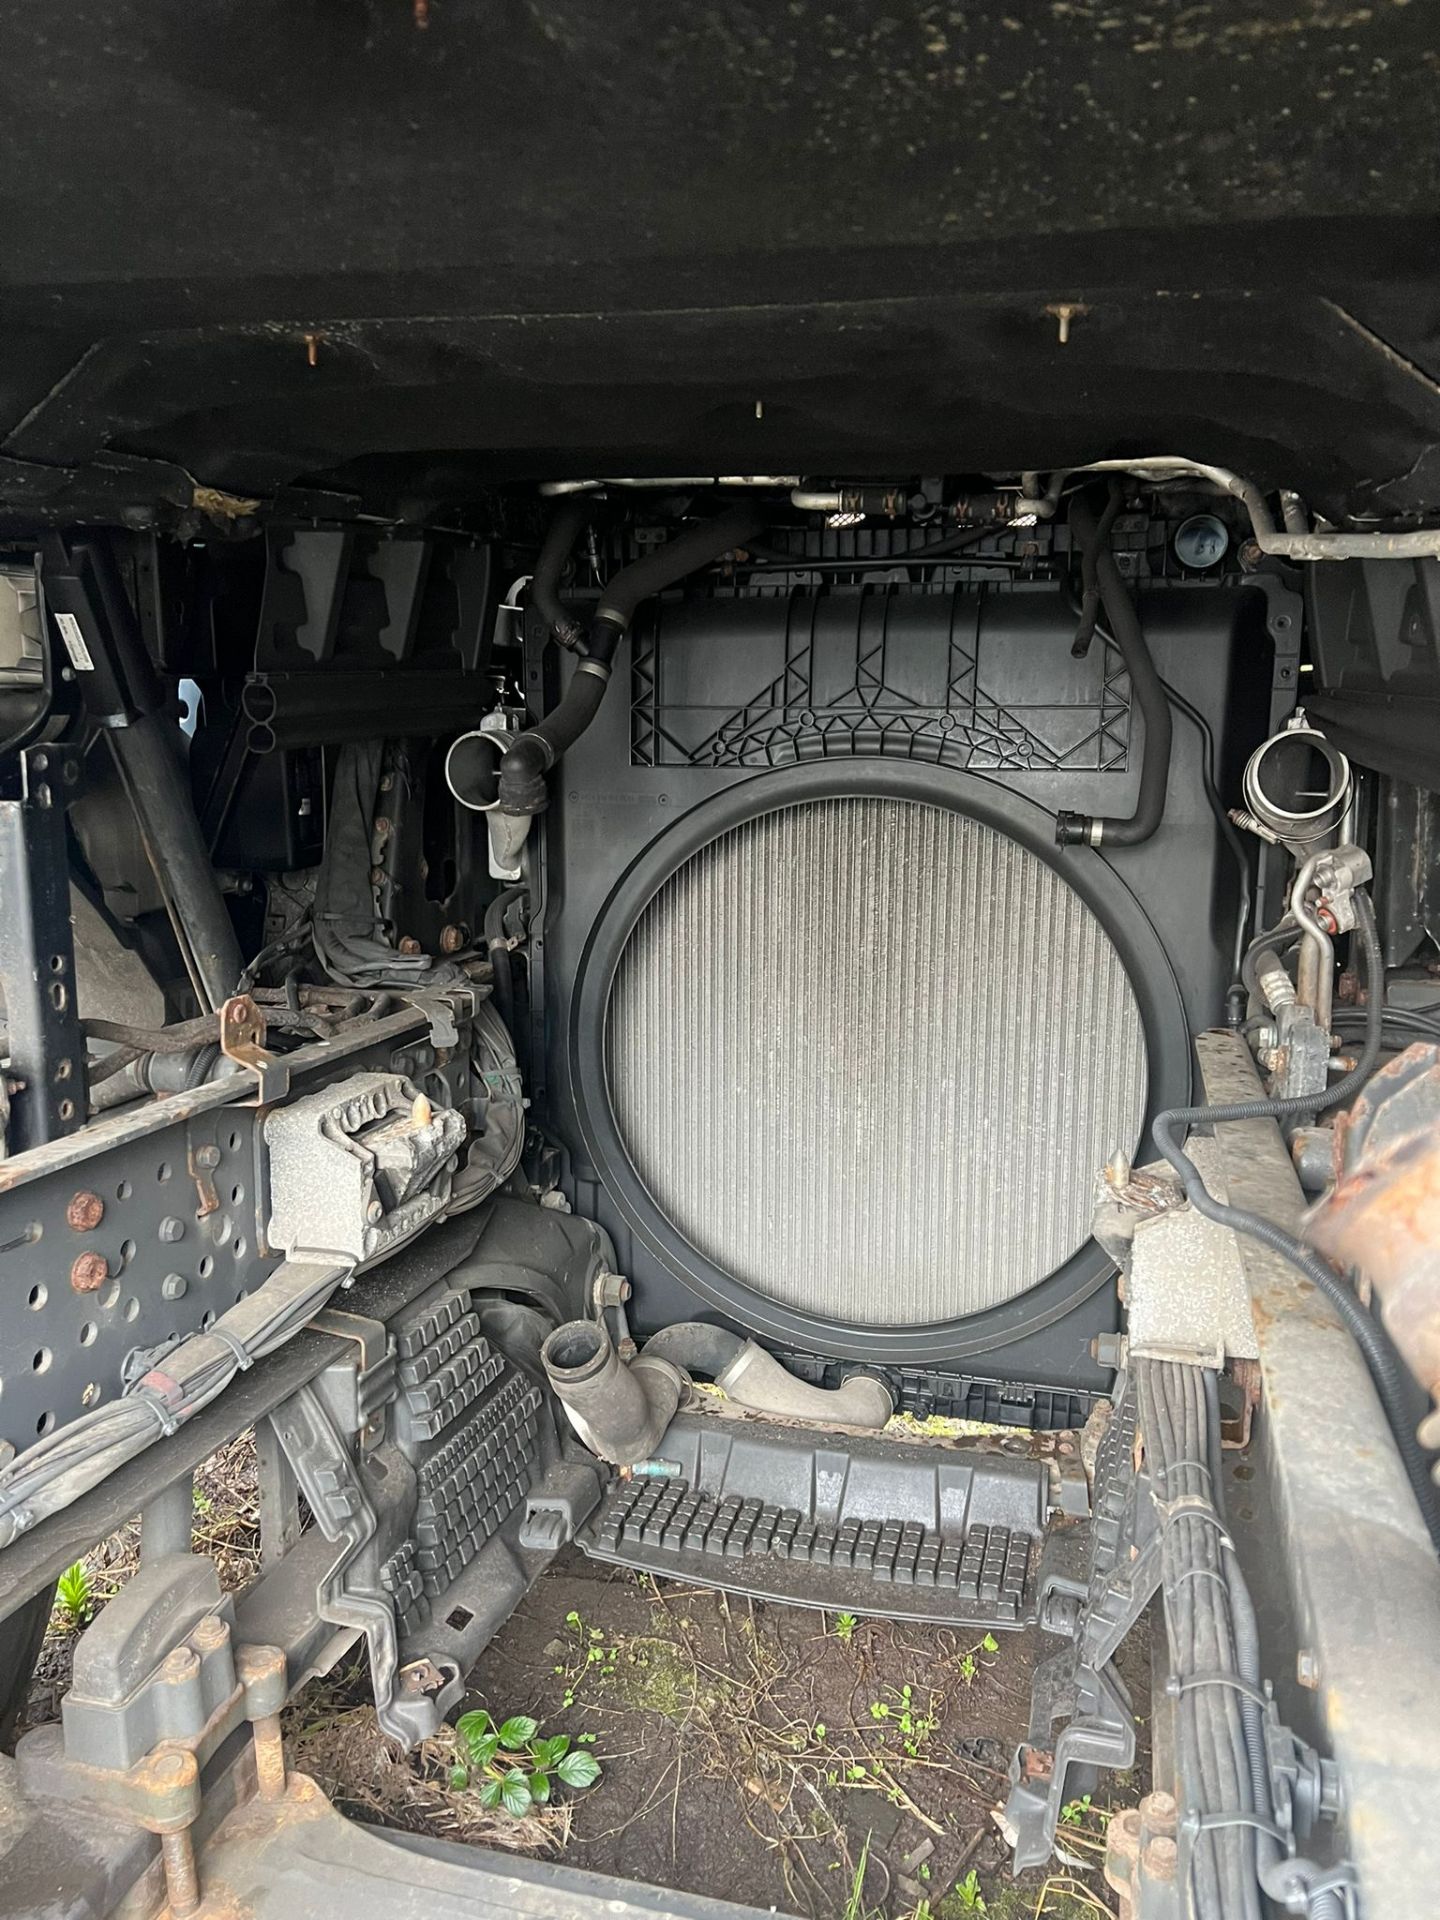 2016, Mercedes Actros 2545 (No Engine or Gearbox) - Image 6 of 10